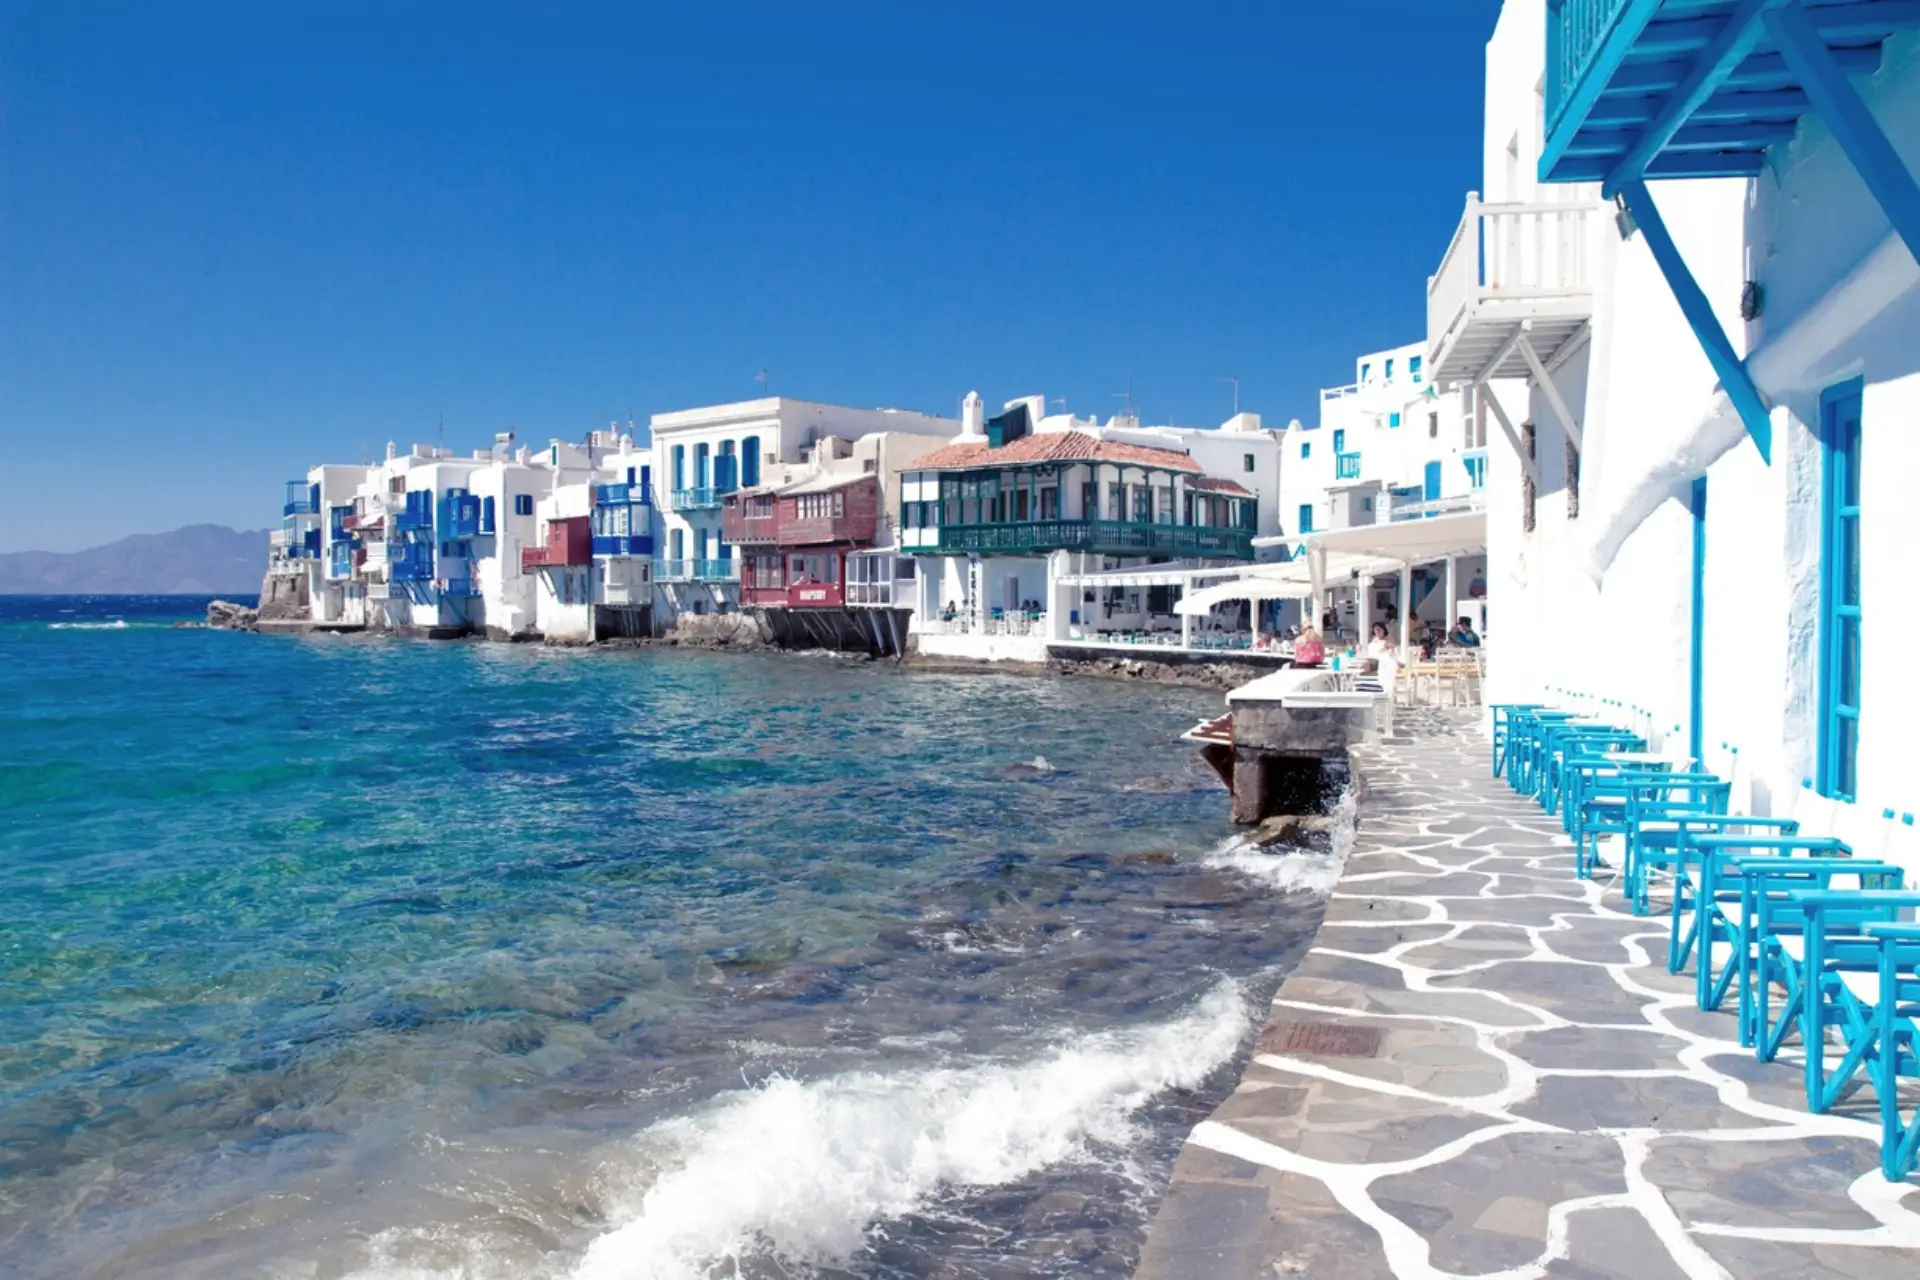 The Top 5 Most Popular Places in the Greek Islands